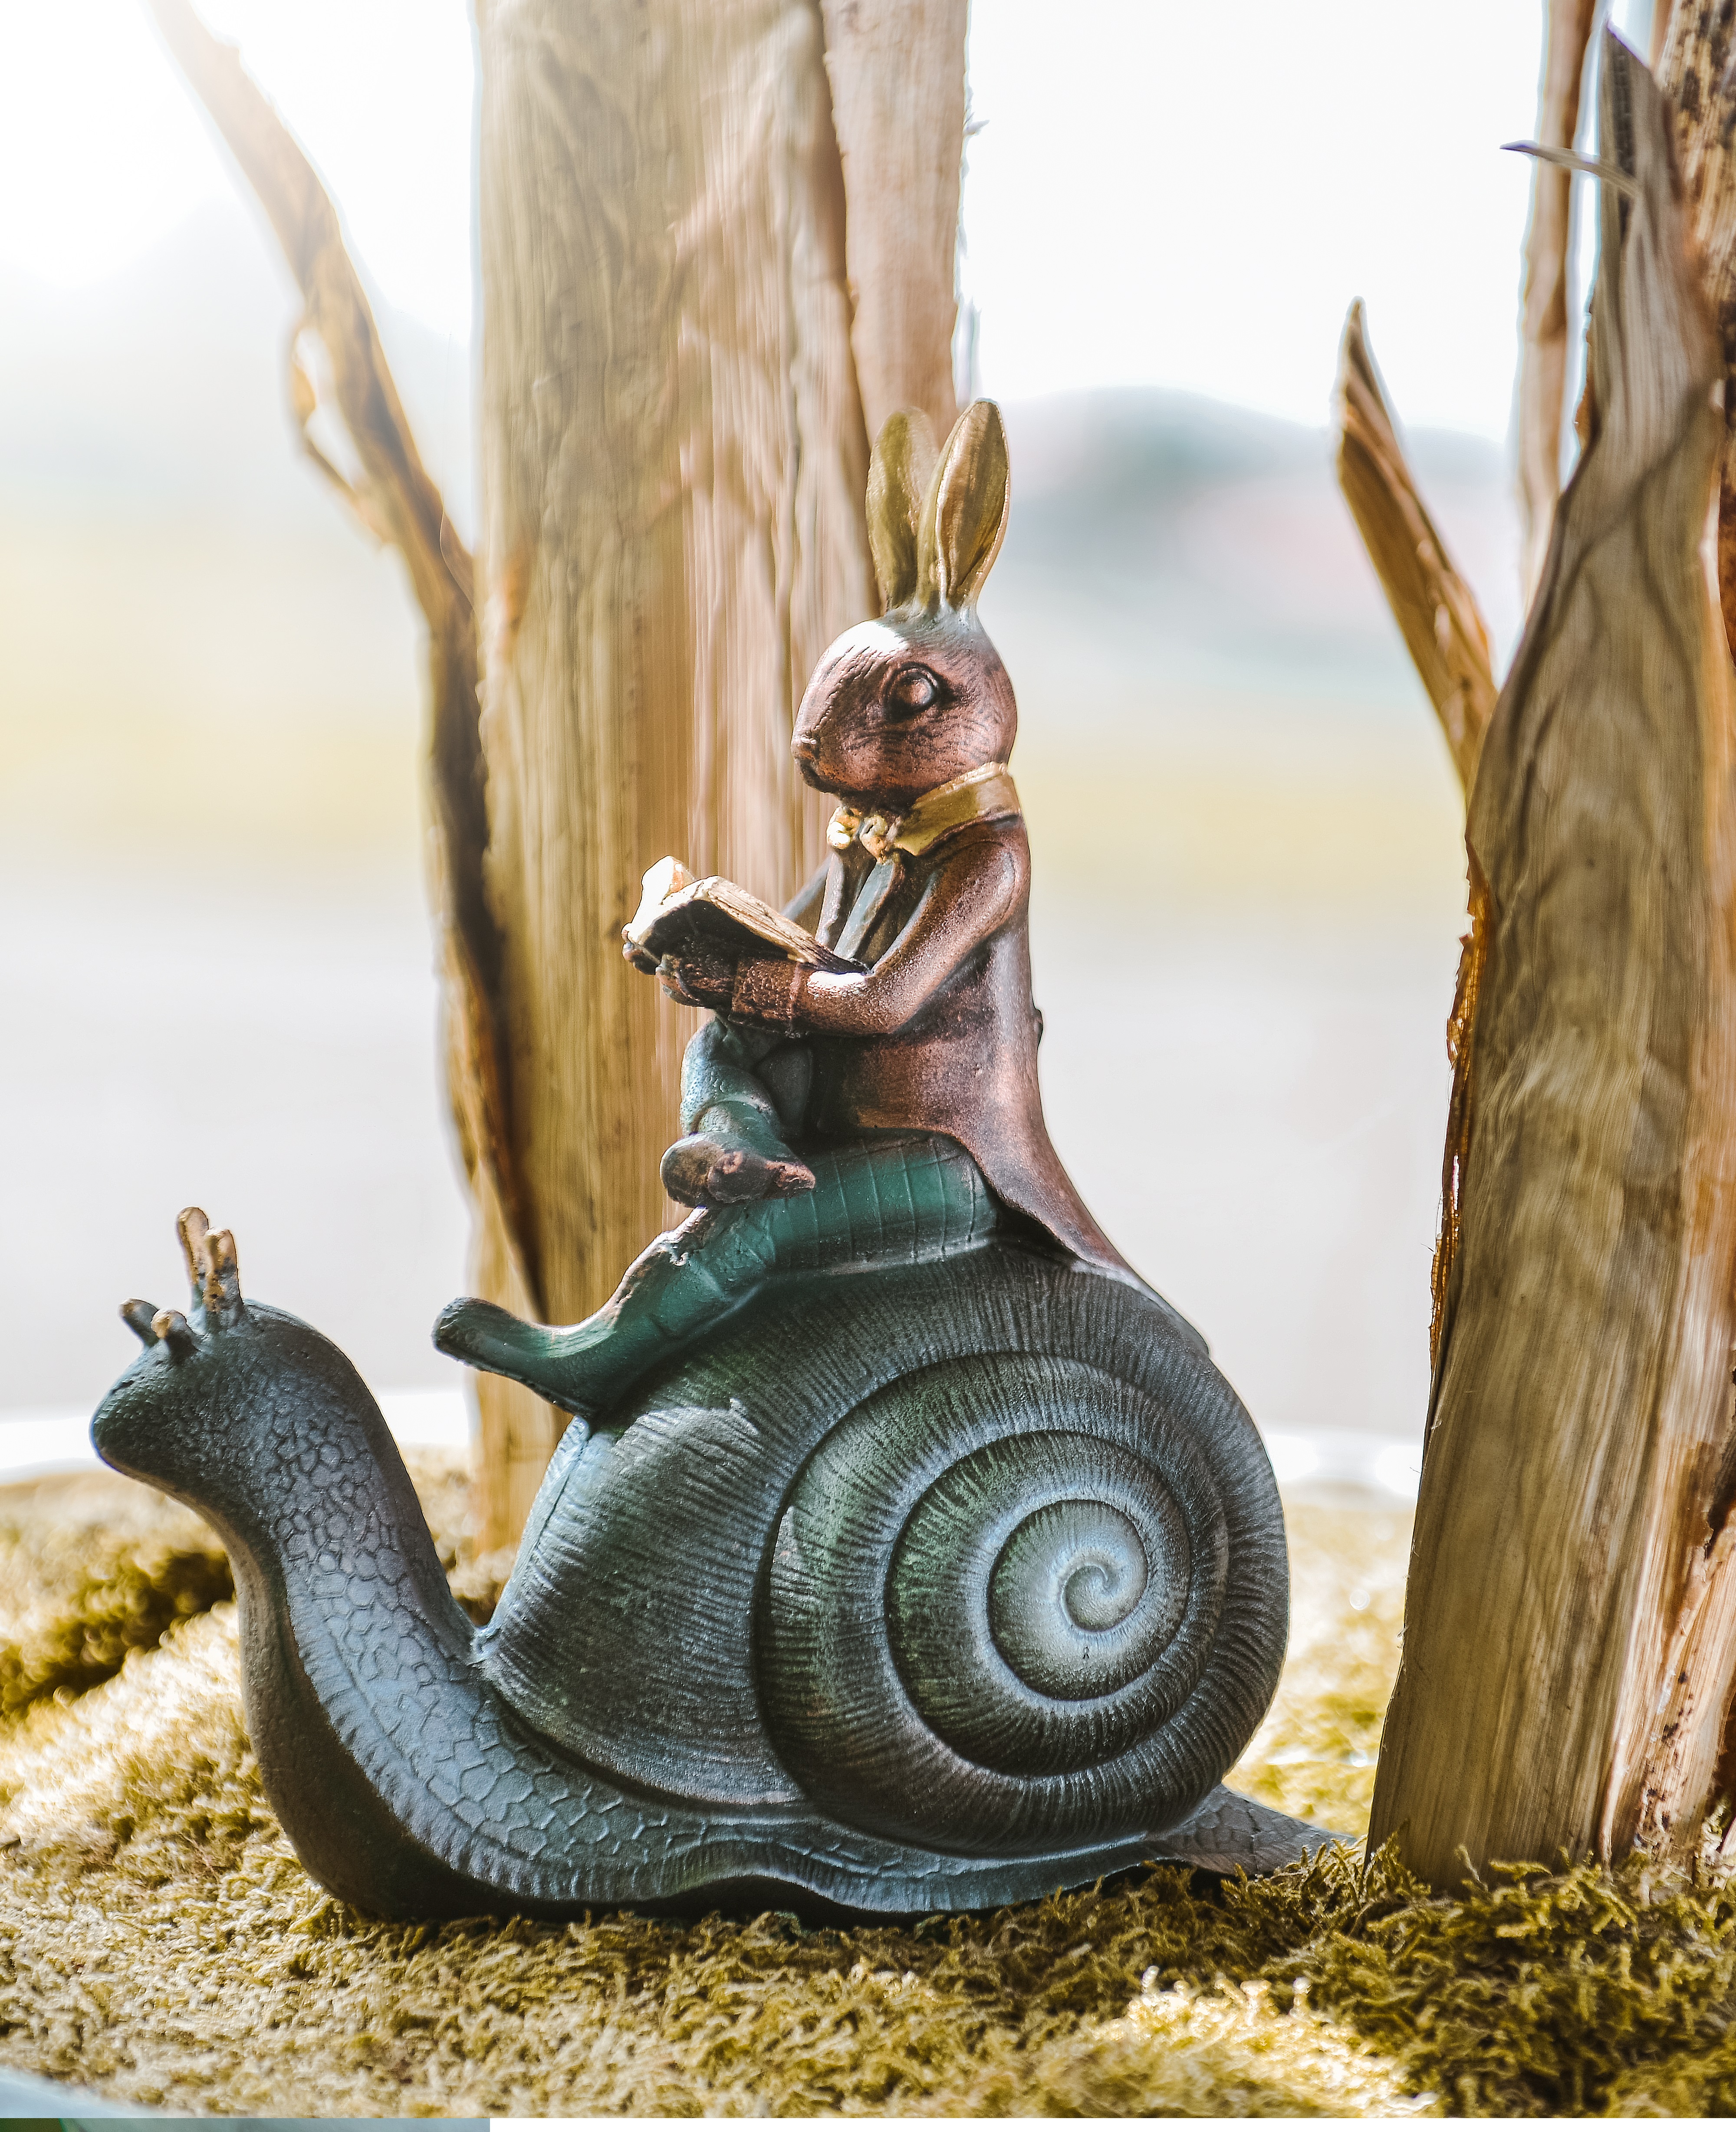 Rabbit and snail figurine reading a book